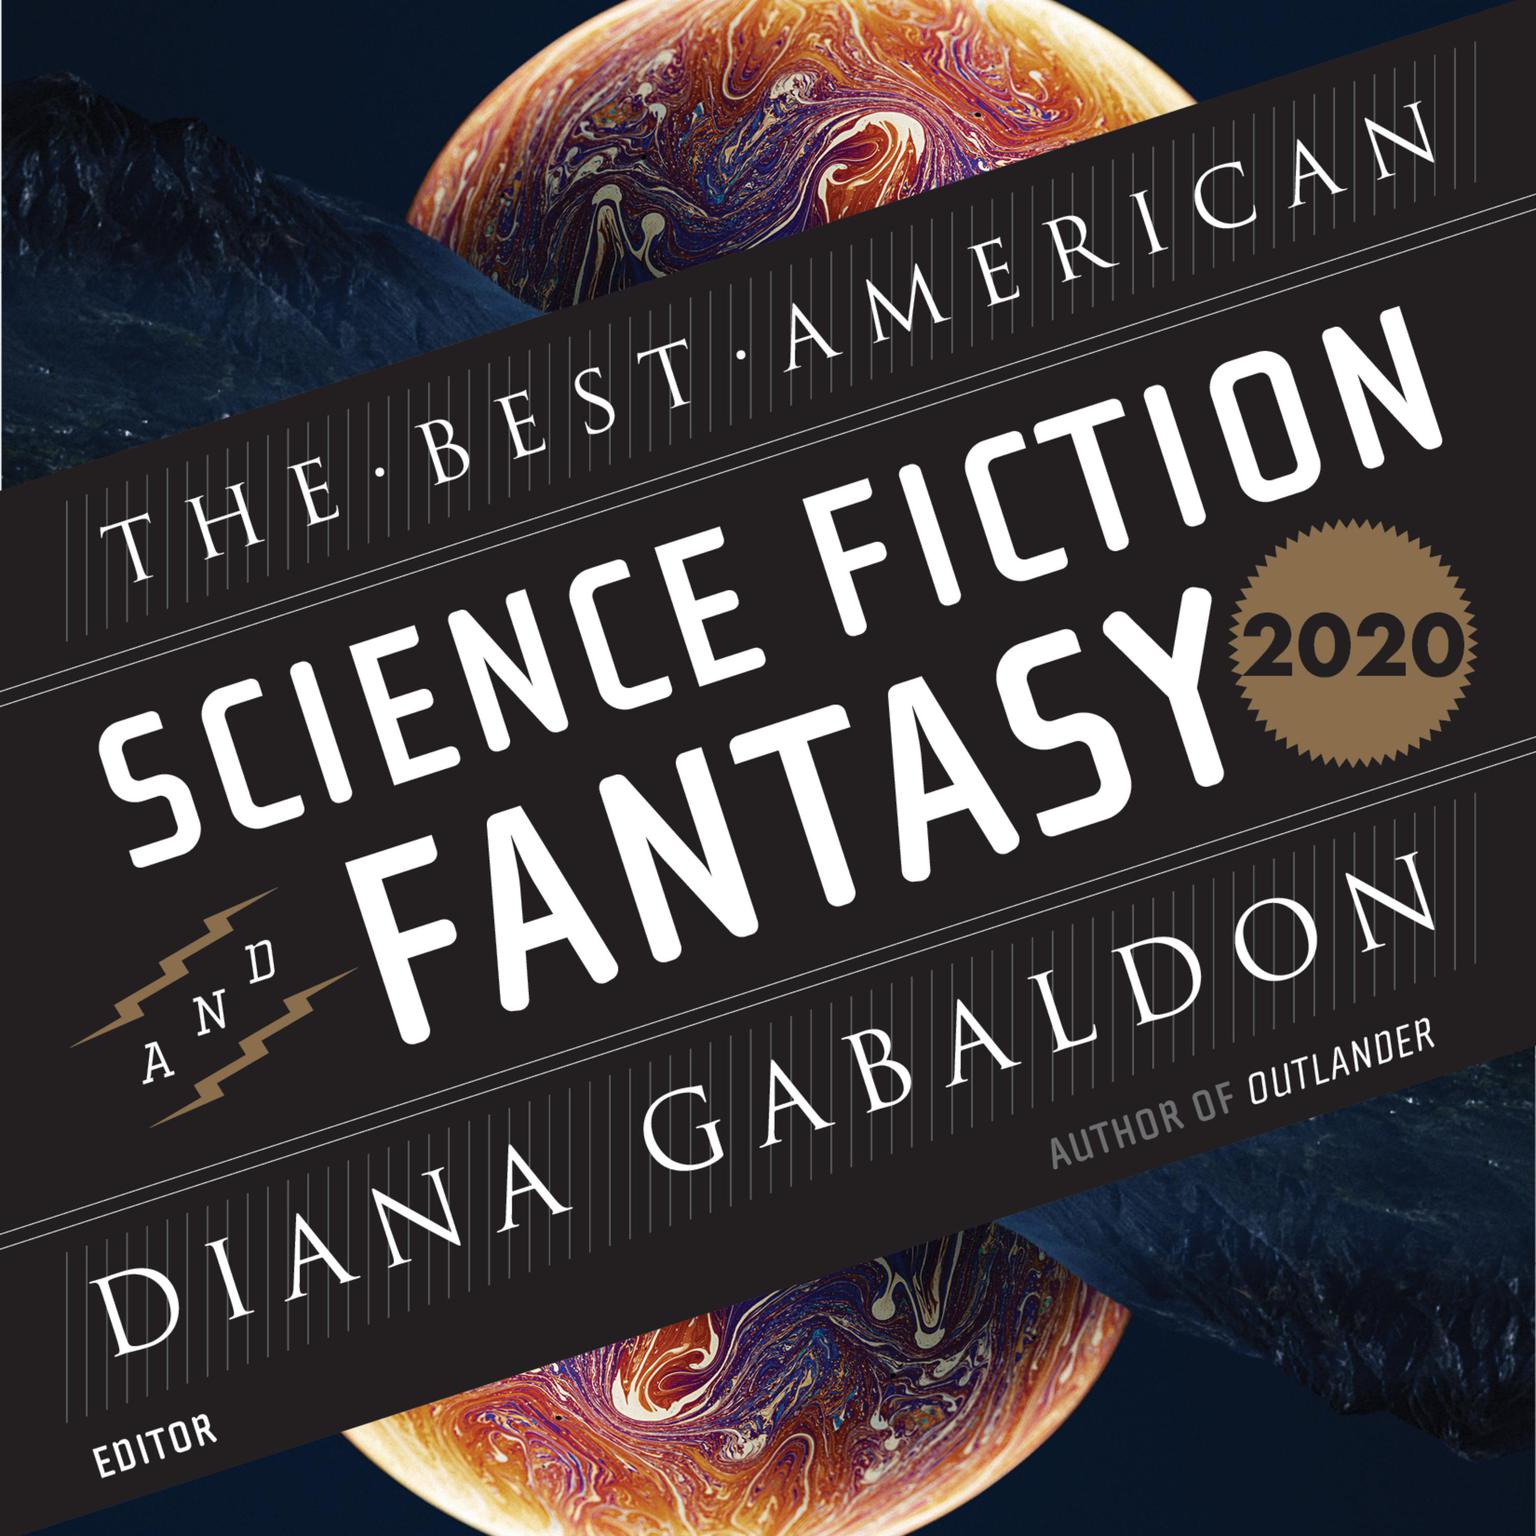 The Best American Science Fiction And Fantasy 2020 Audiobook, by John Joseph Adams